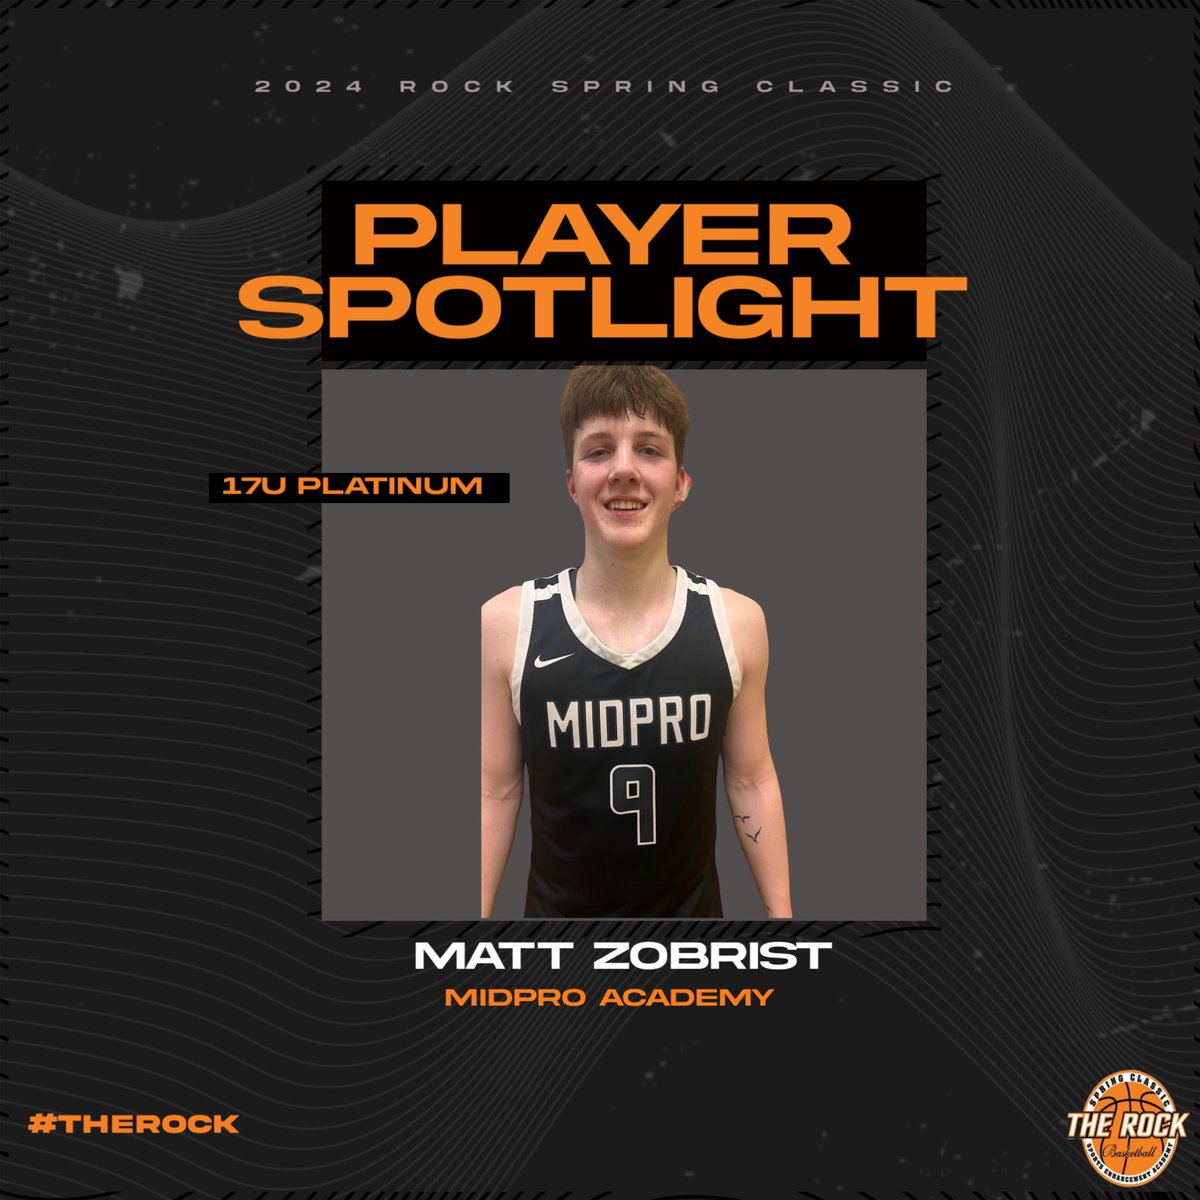 2025 Matt Zobrist had a monster game, scoring 23pts on 7 3’s in @MidProAcademy win over Midwest Renegade. #TheROCK